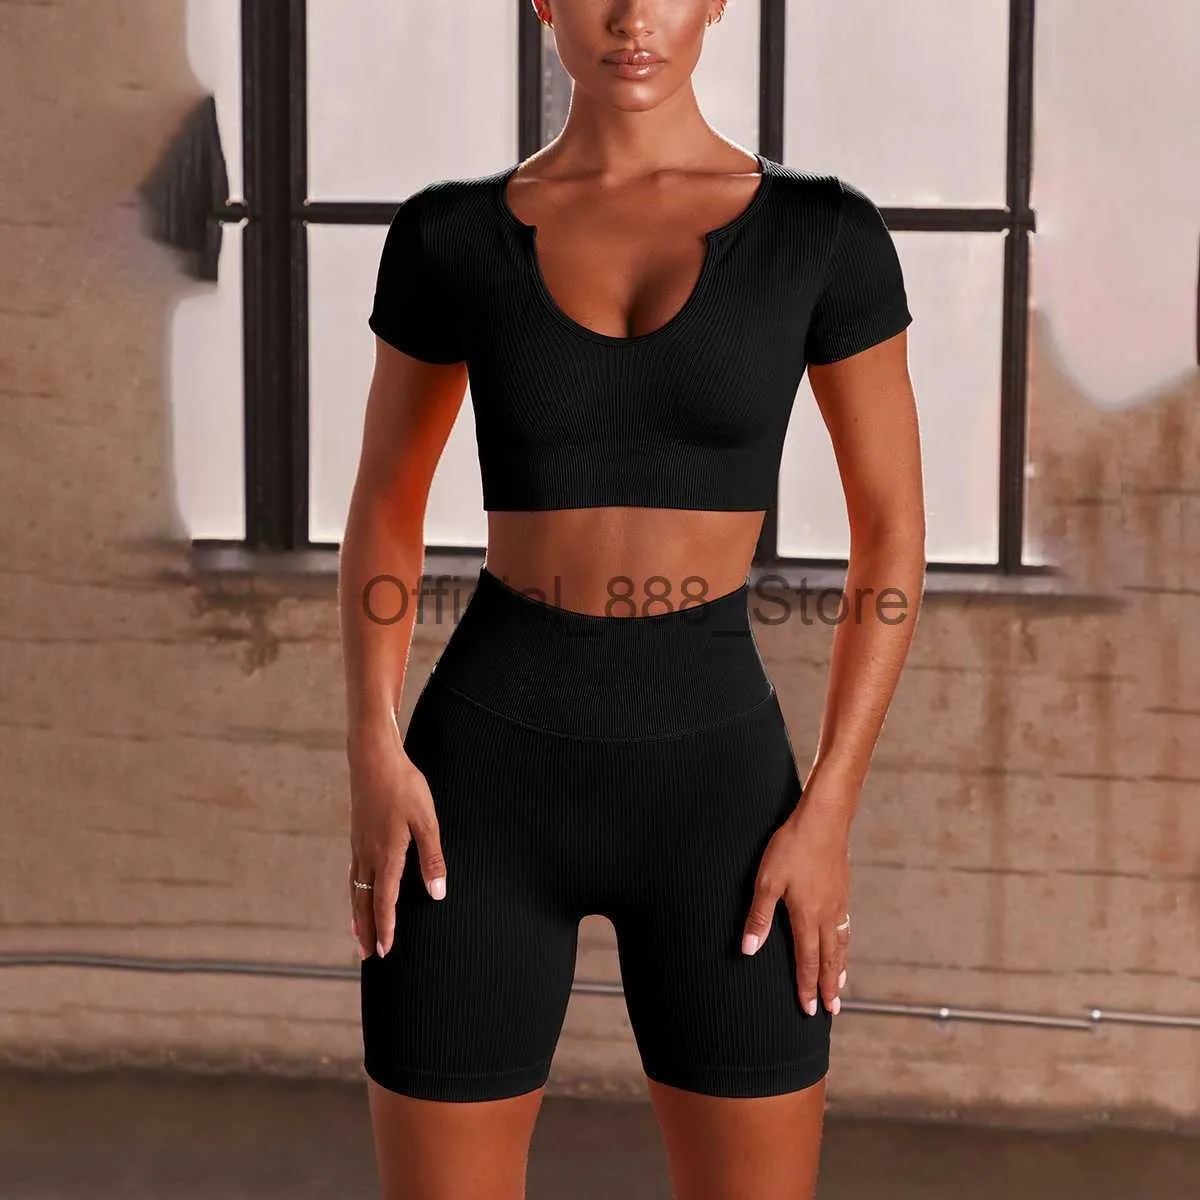 Womens Seamless Yoga Set Short Sleeve Nude Sports Bra And Crop Top For  Fitness, Workout, And Gym Sexy Sports Clothing With Leggings X0825 From  Official_888_store, $15.7